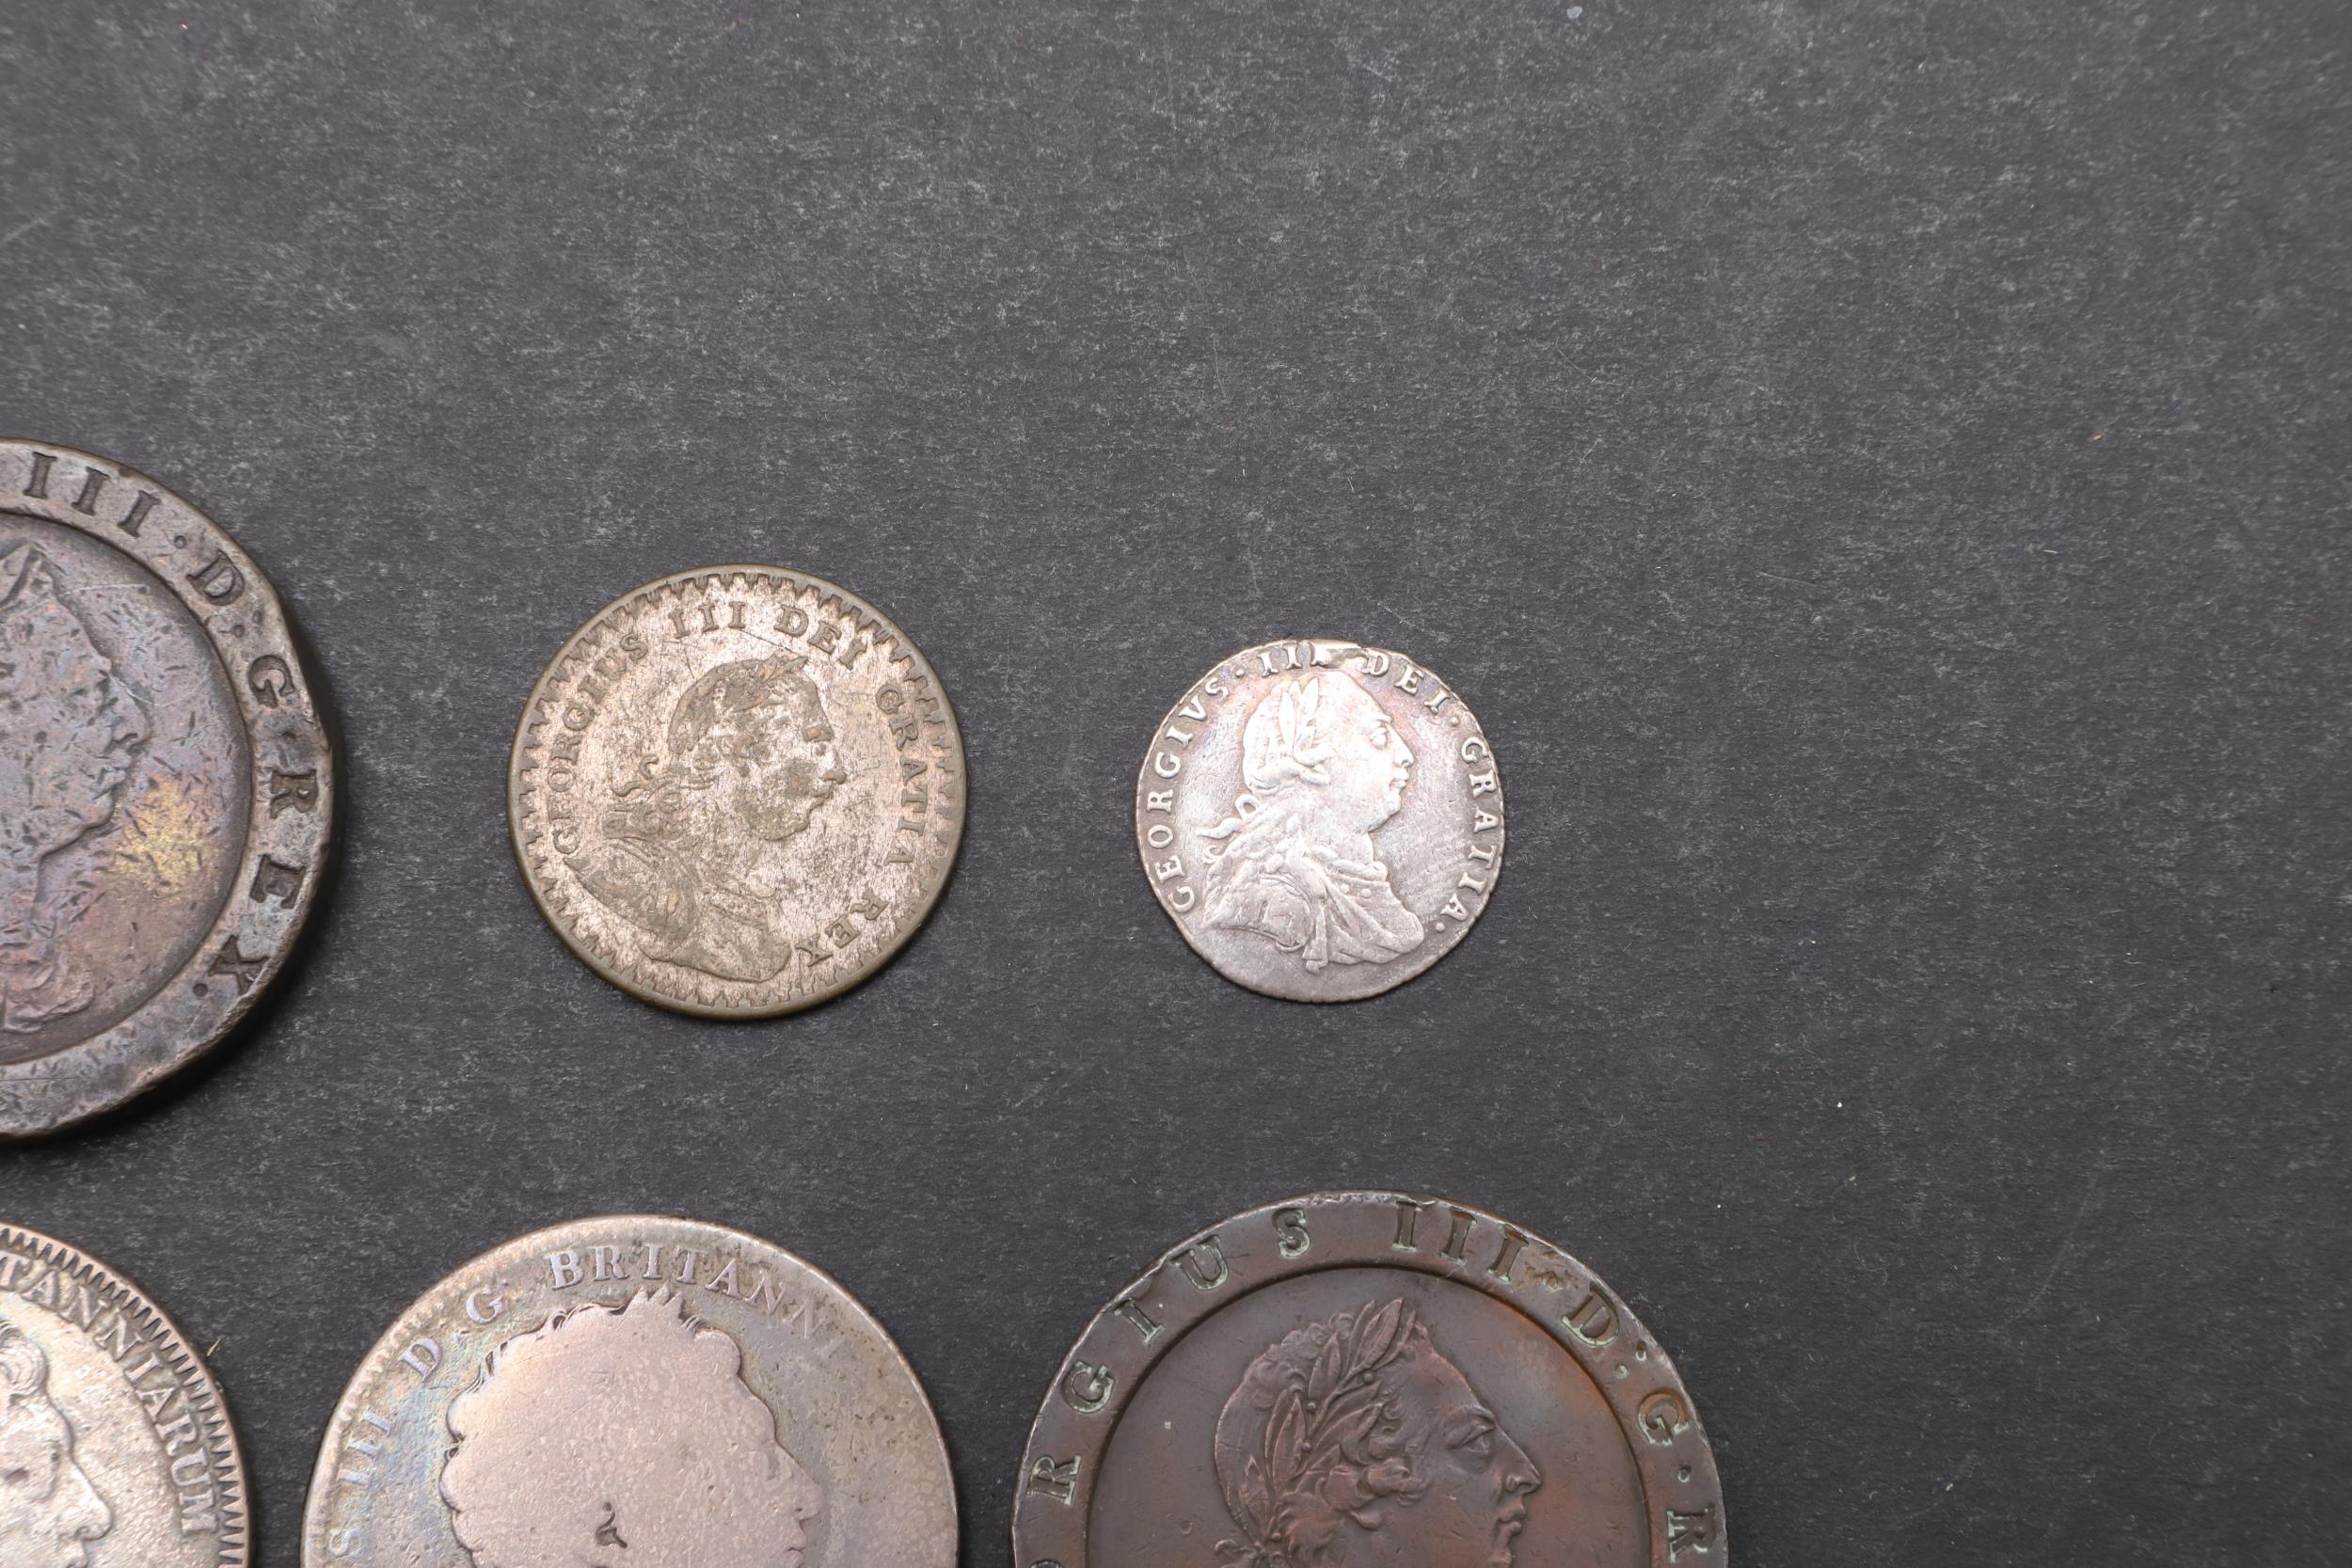 A GEORGE III CROWN AND A SMALL COLLECTION OF SIMILAR COINS. - Image 3 of 7